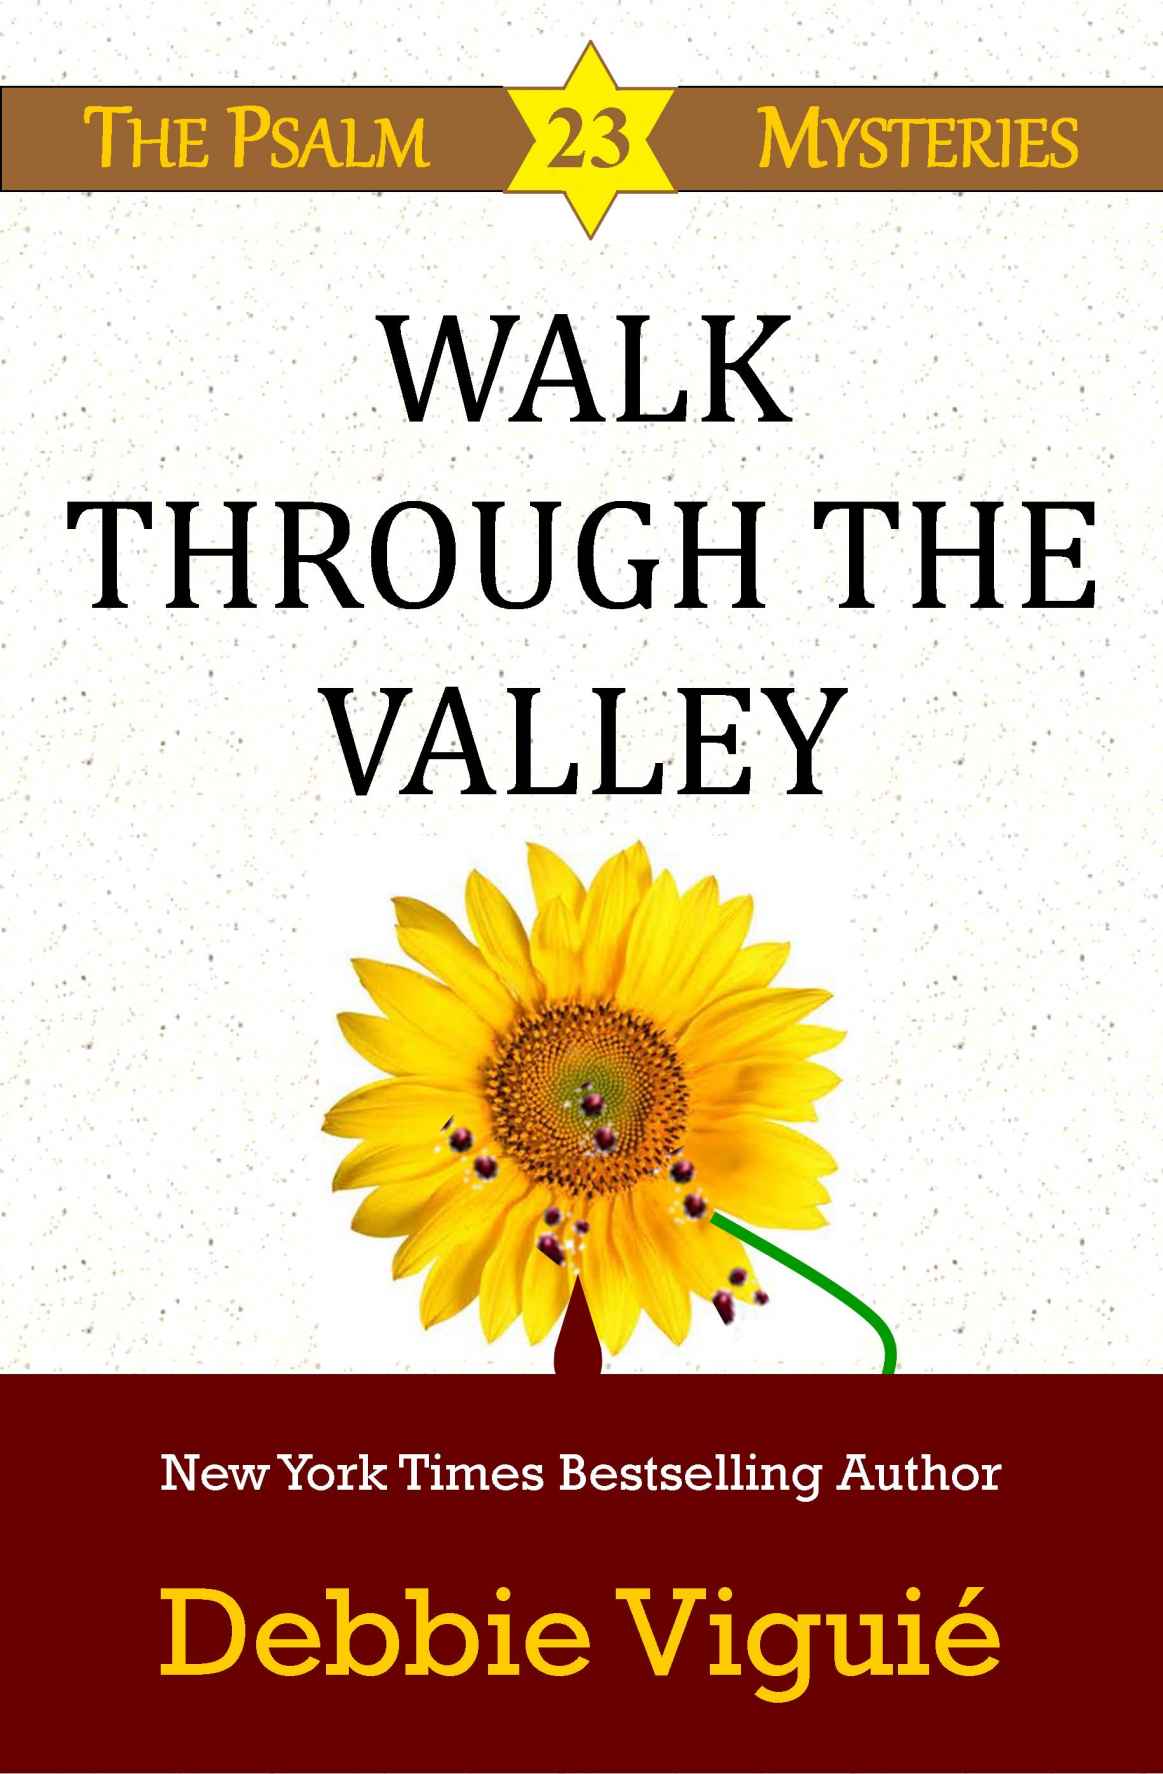 Walk Through the Valley (Psalm 23 Mysteries) by Debbie Viguié